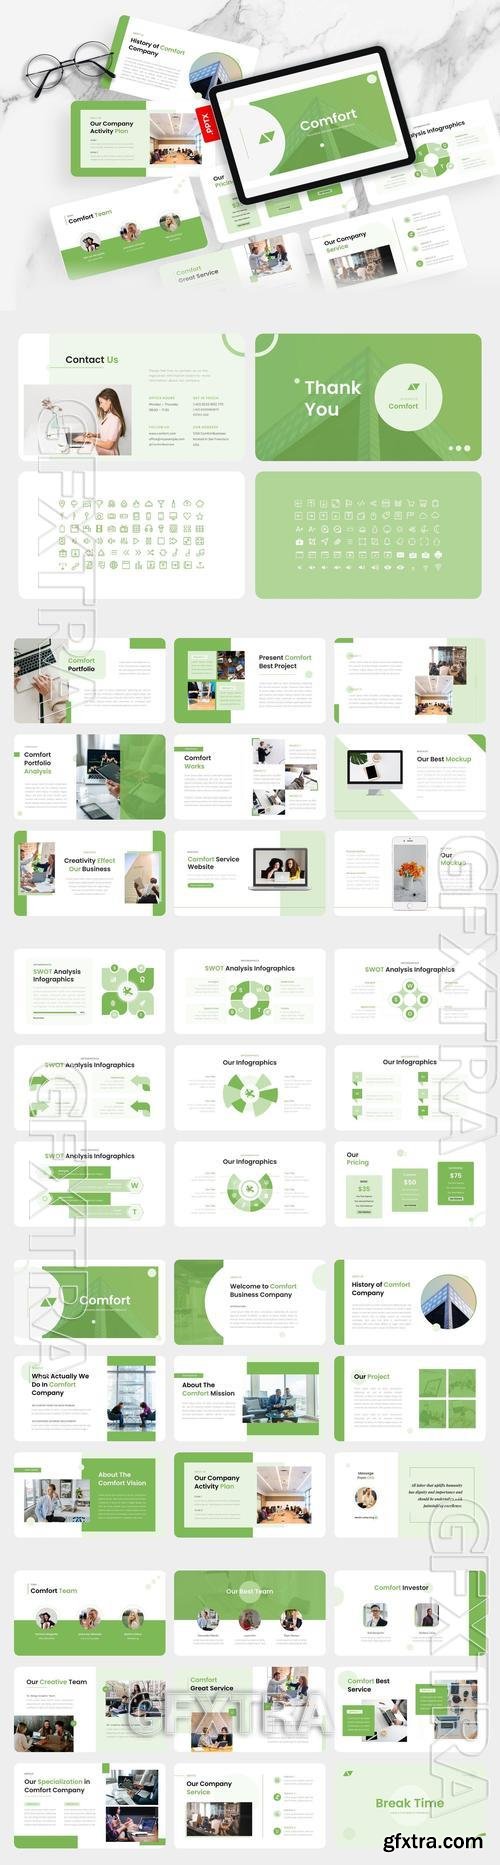 Comfort - Business PowerPoint Template Z8QY294